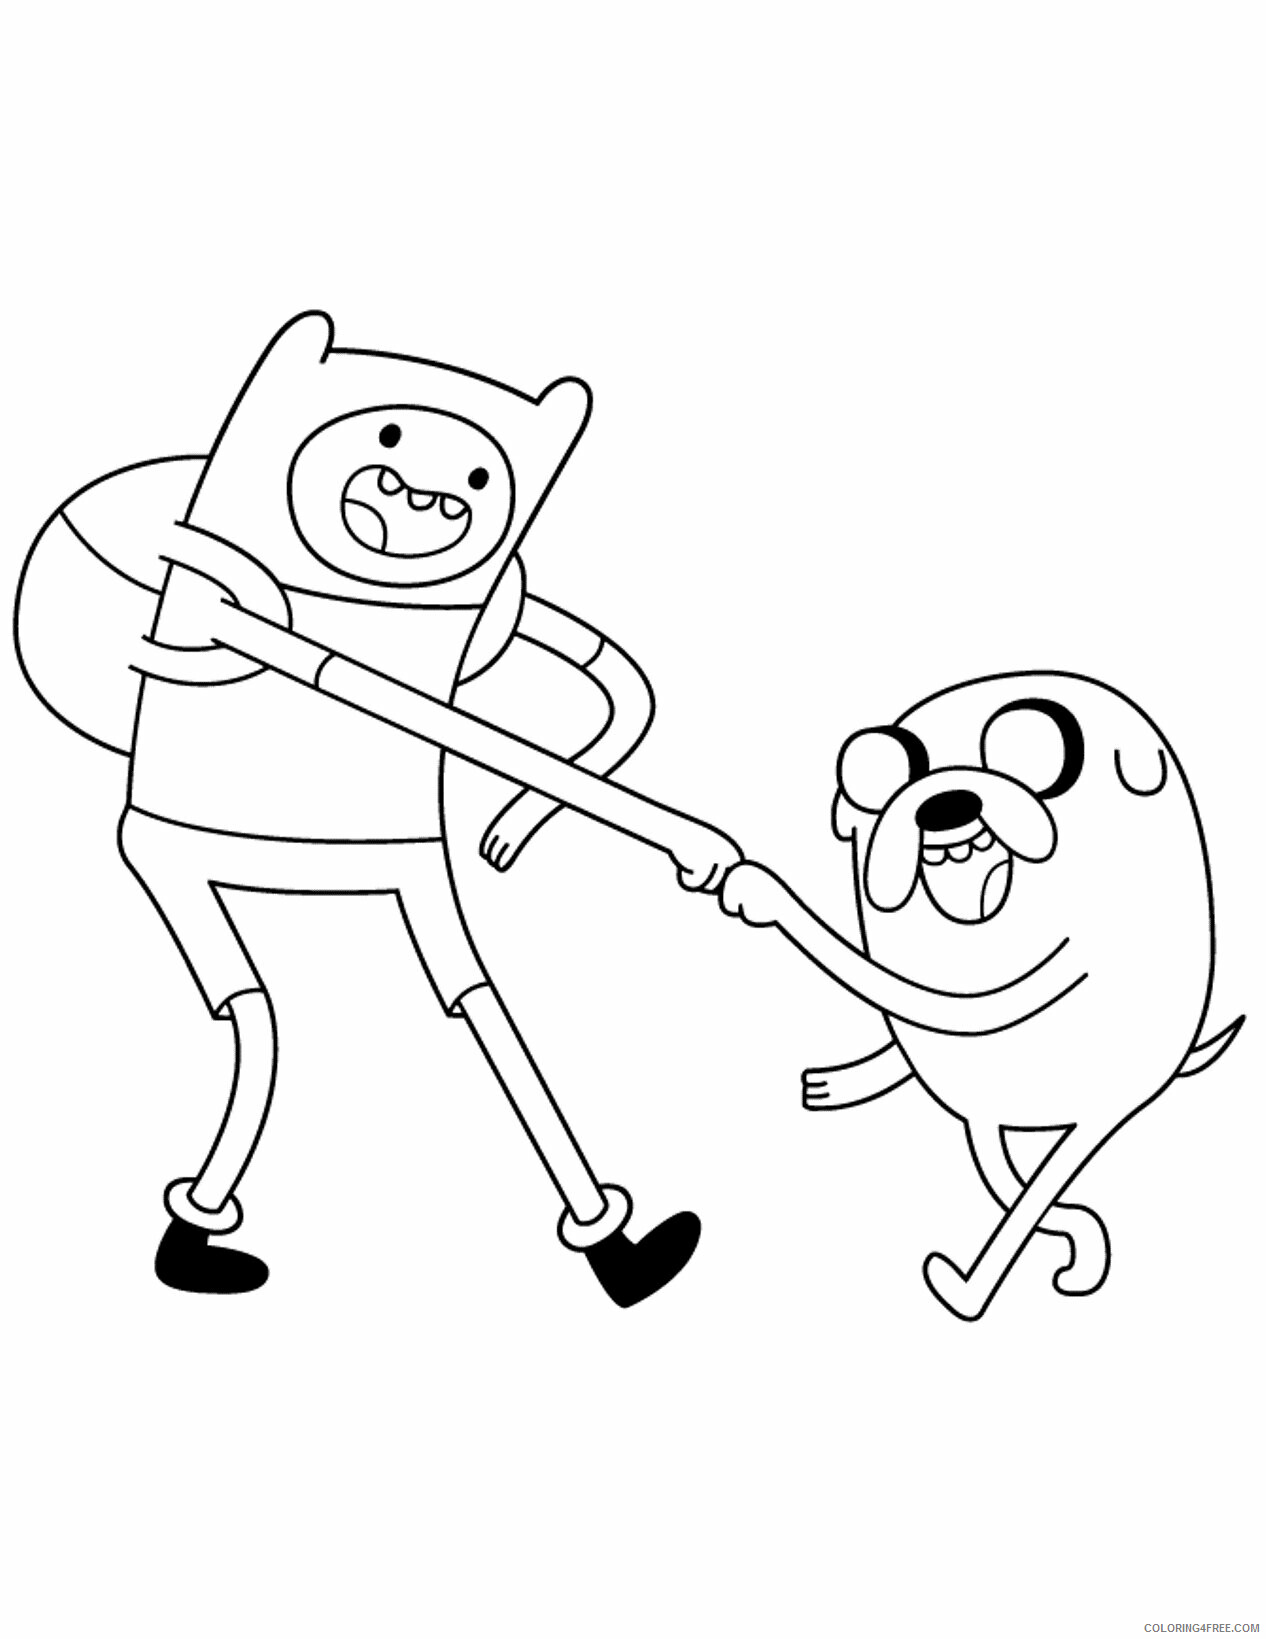 Adventure Time Coloring Pages Online Printable Sheets Adventure Time Finn 2021 a 2638 Coloring4free